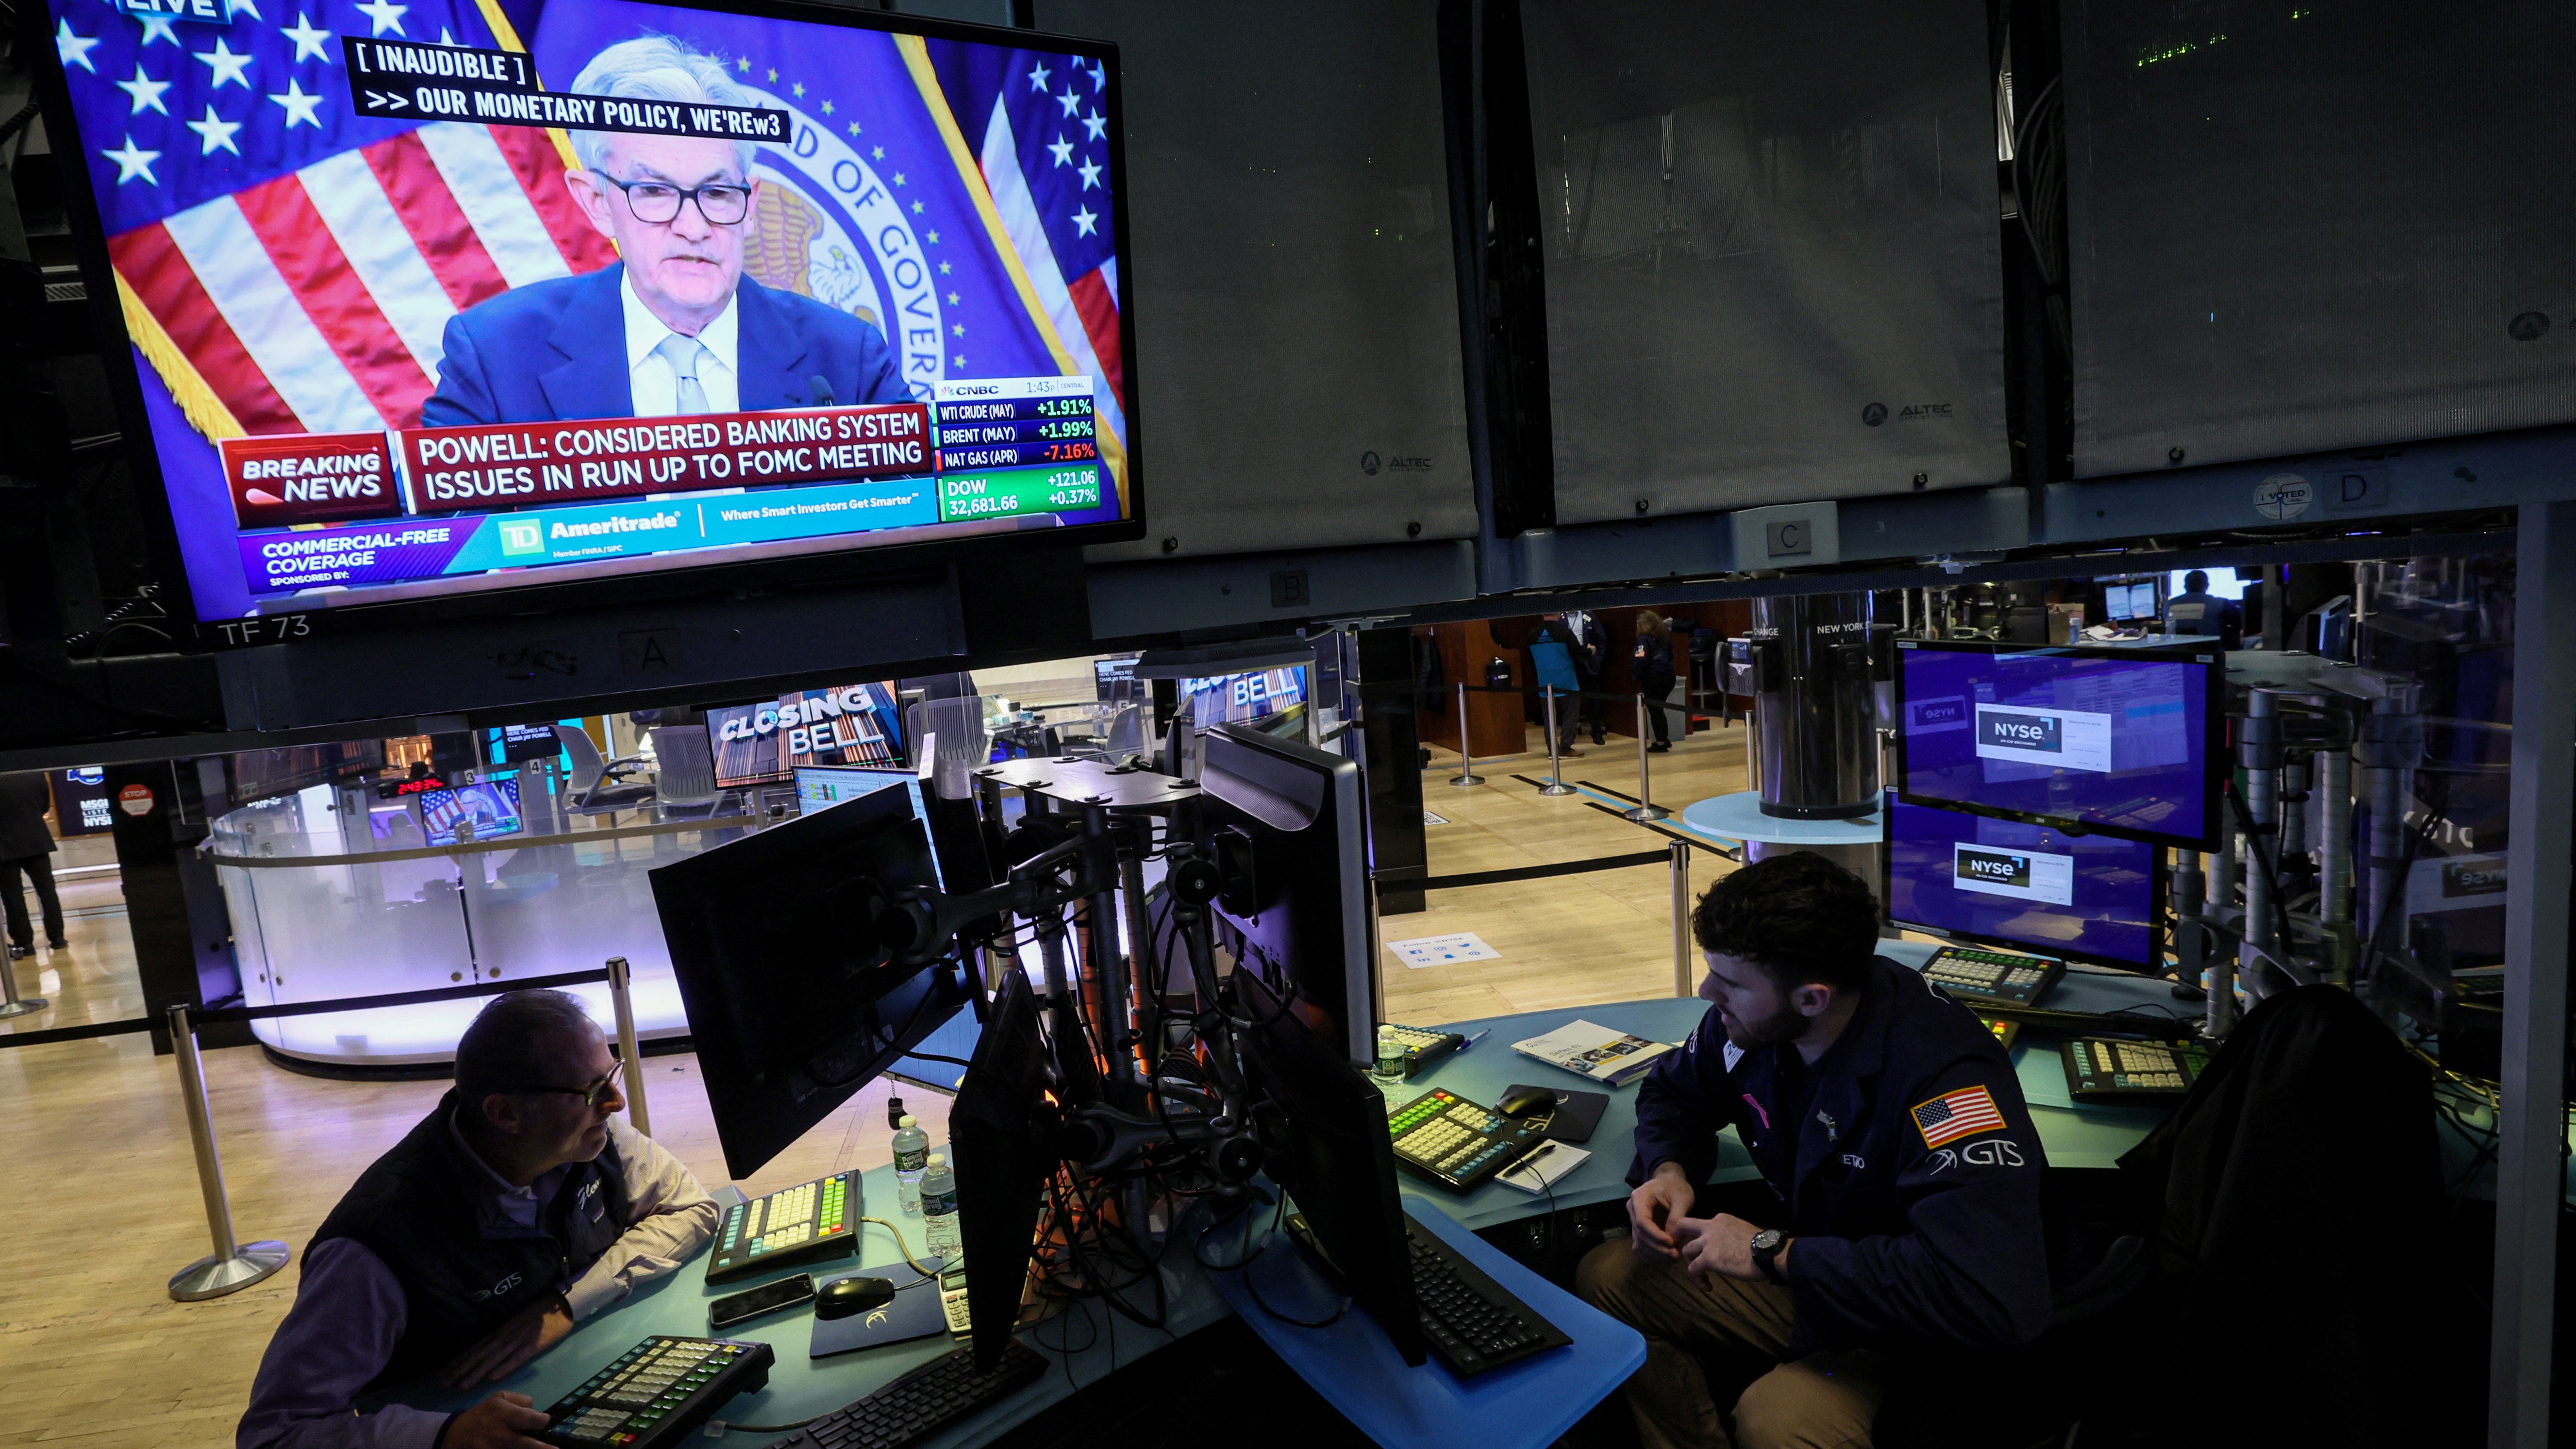 Traders react as Federal Reserve Chair Jerome Powell is seen delivering remarks on a screen, on the floor of the New York Stock Exchange (NYSE) in New York City, U.S., March 22, 2023.  REUTERS/Brendan McDermid